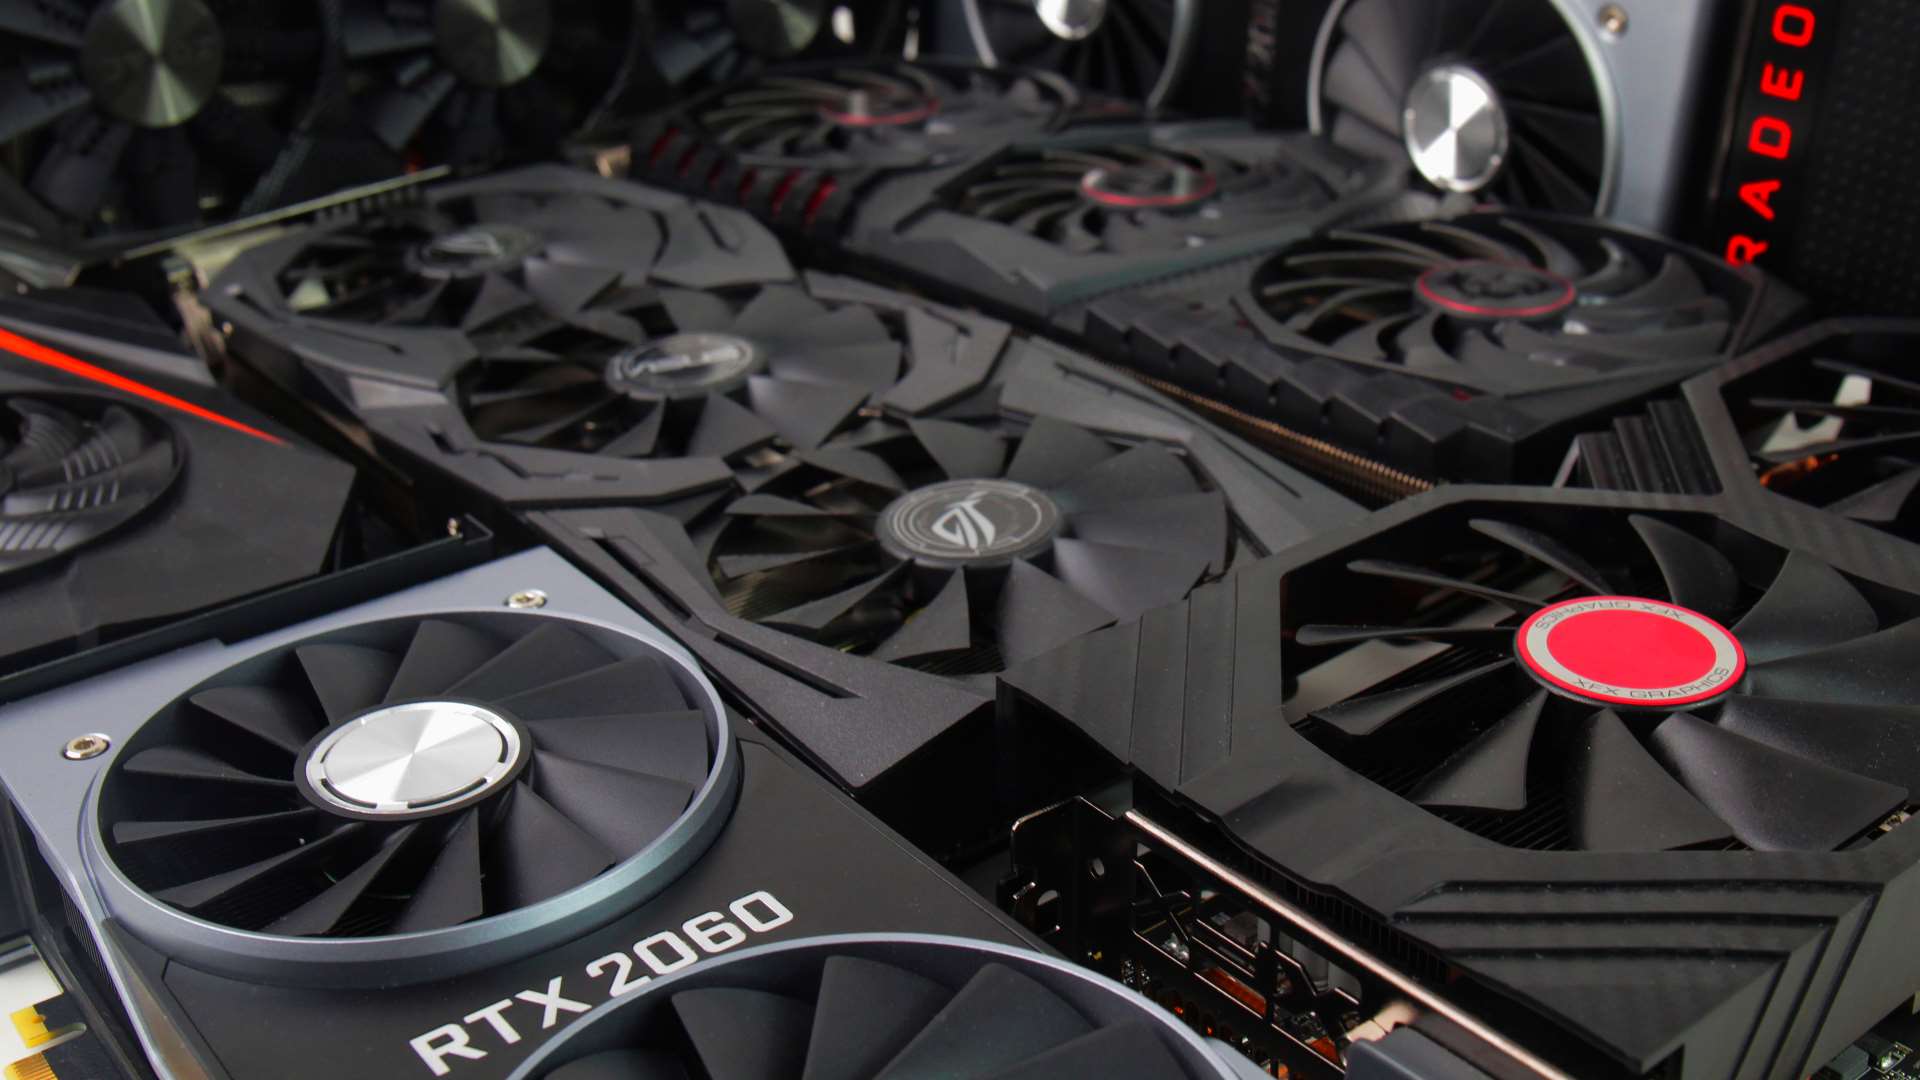 Best Graphics Card What Is The Top Graphics Card For Gaming In 2021 Pcgamesn